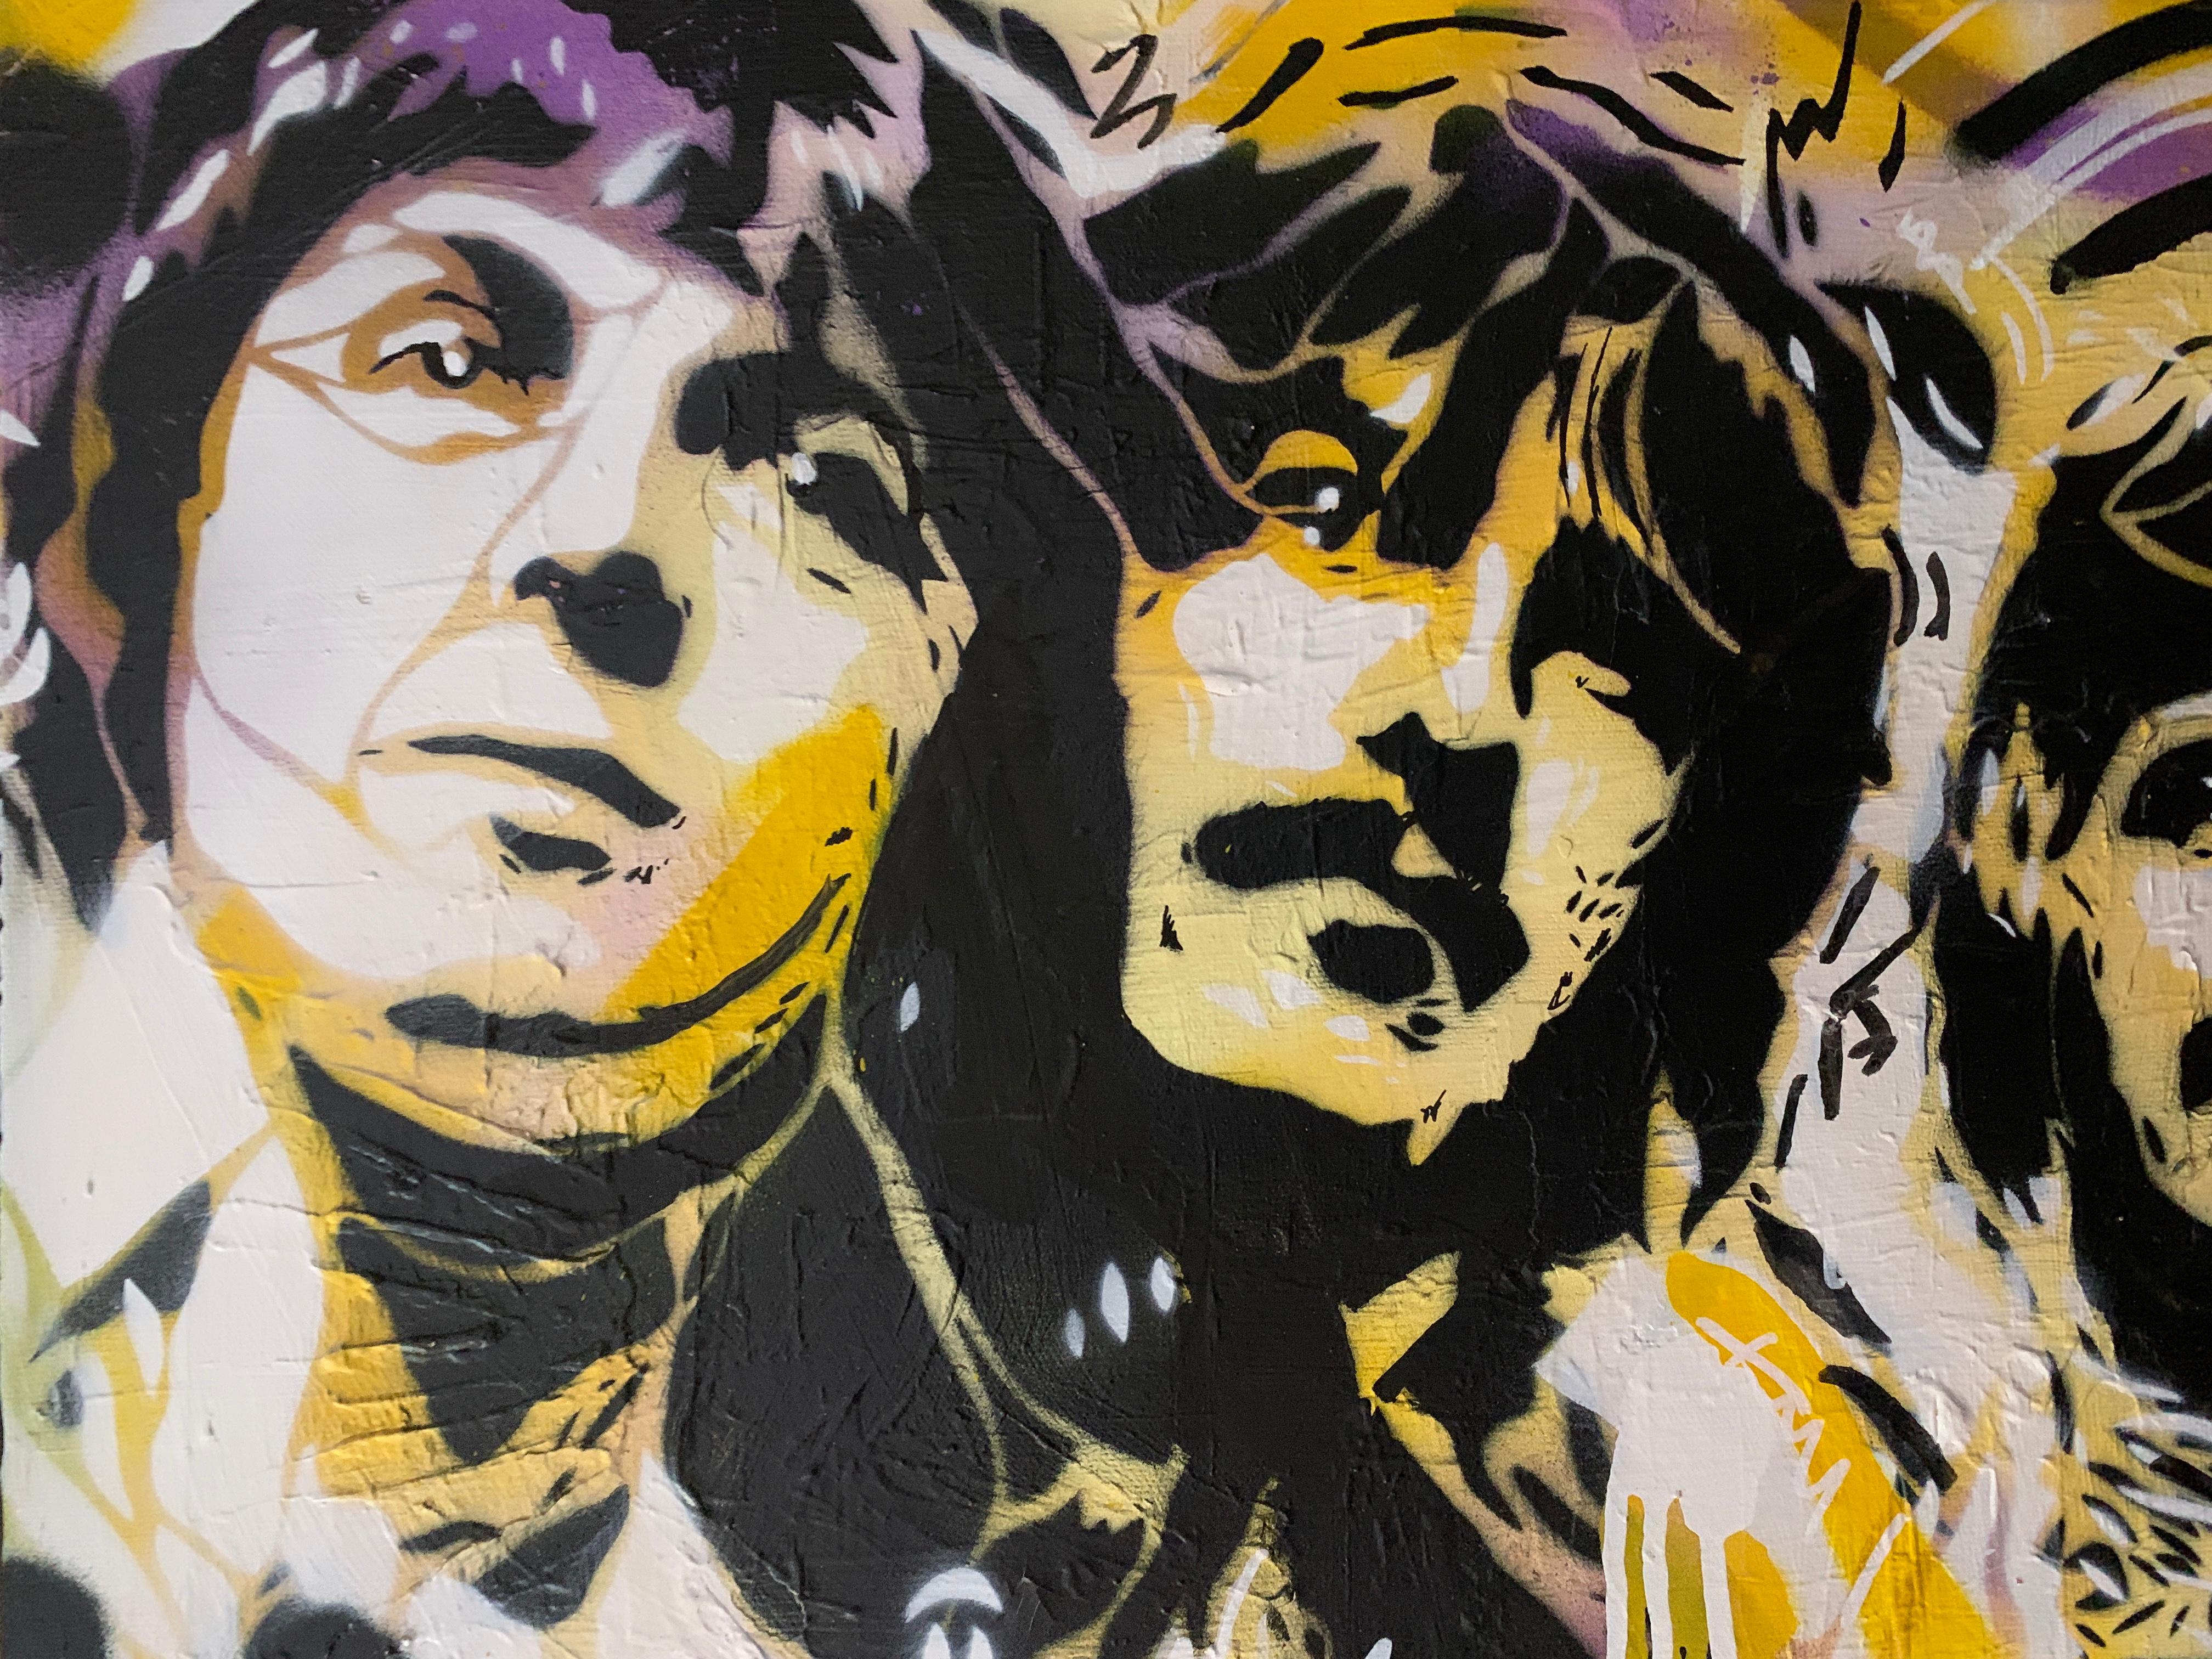 Pop Art Portrait of the Beatles music group in Graffiti, street art style - Painting by Stephen Quick